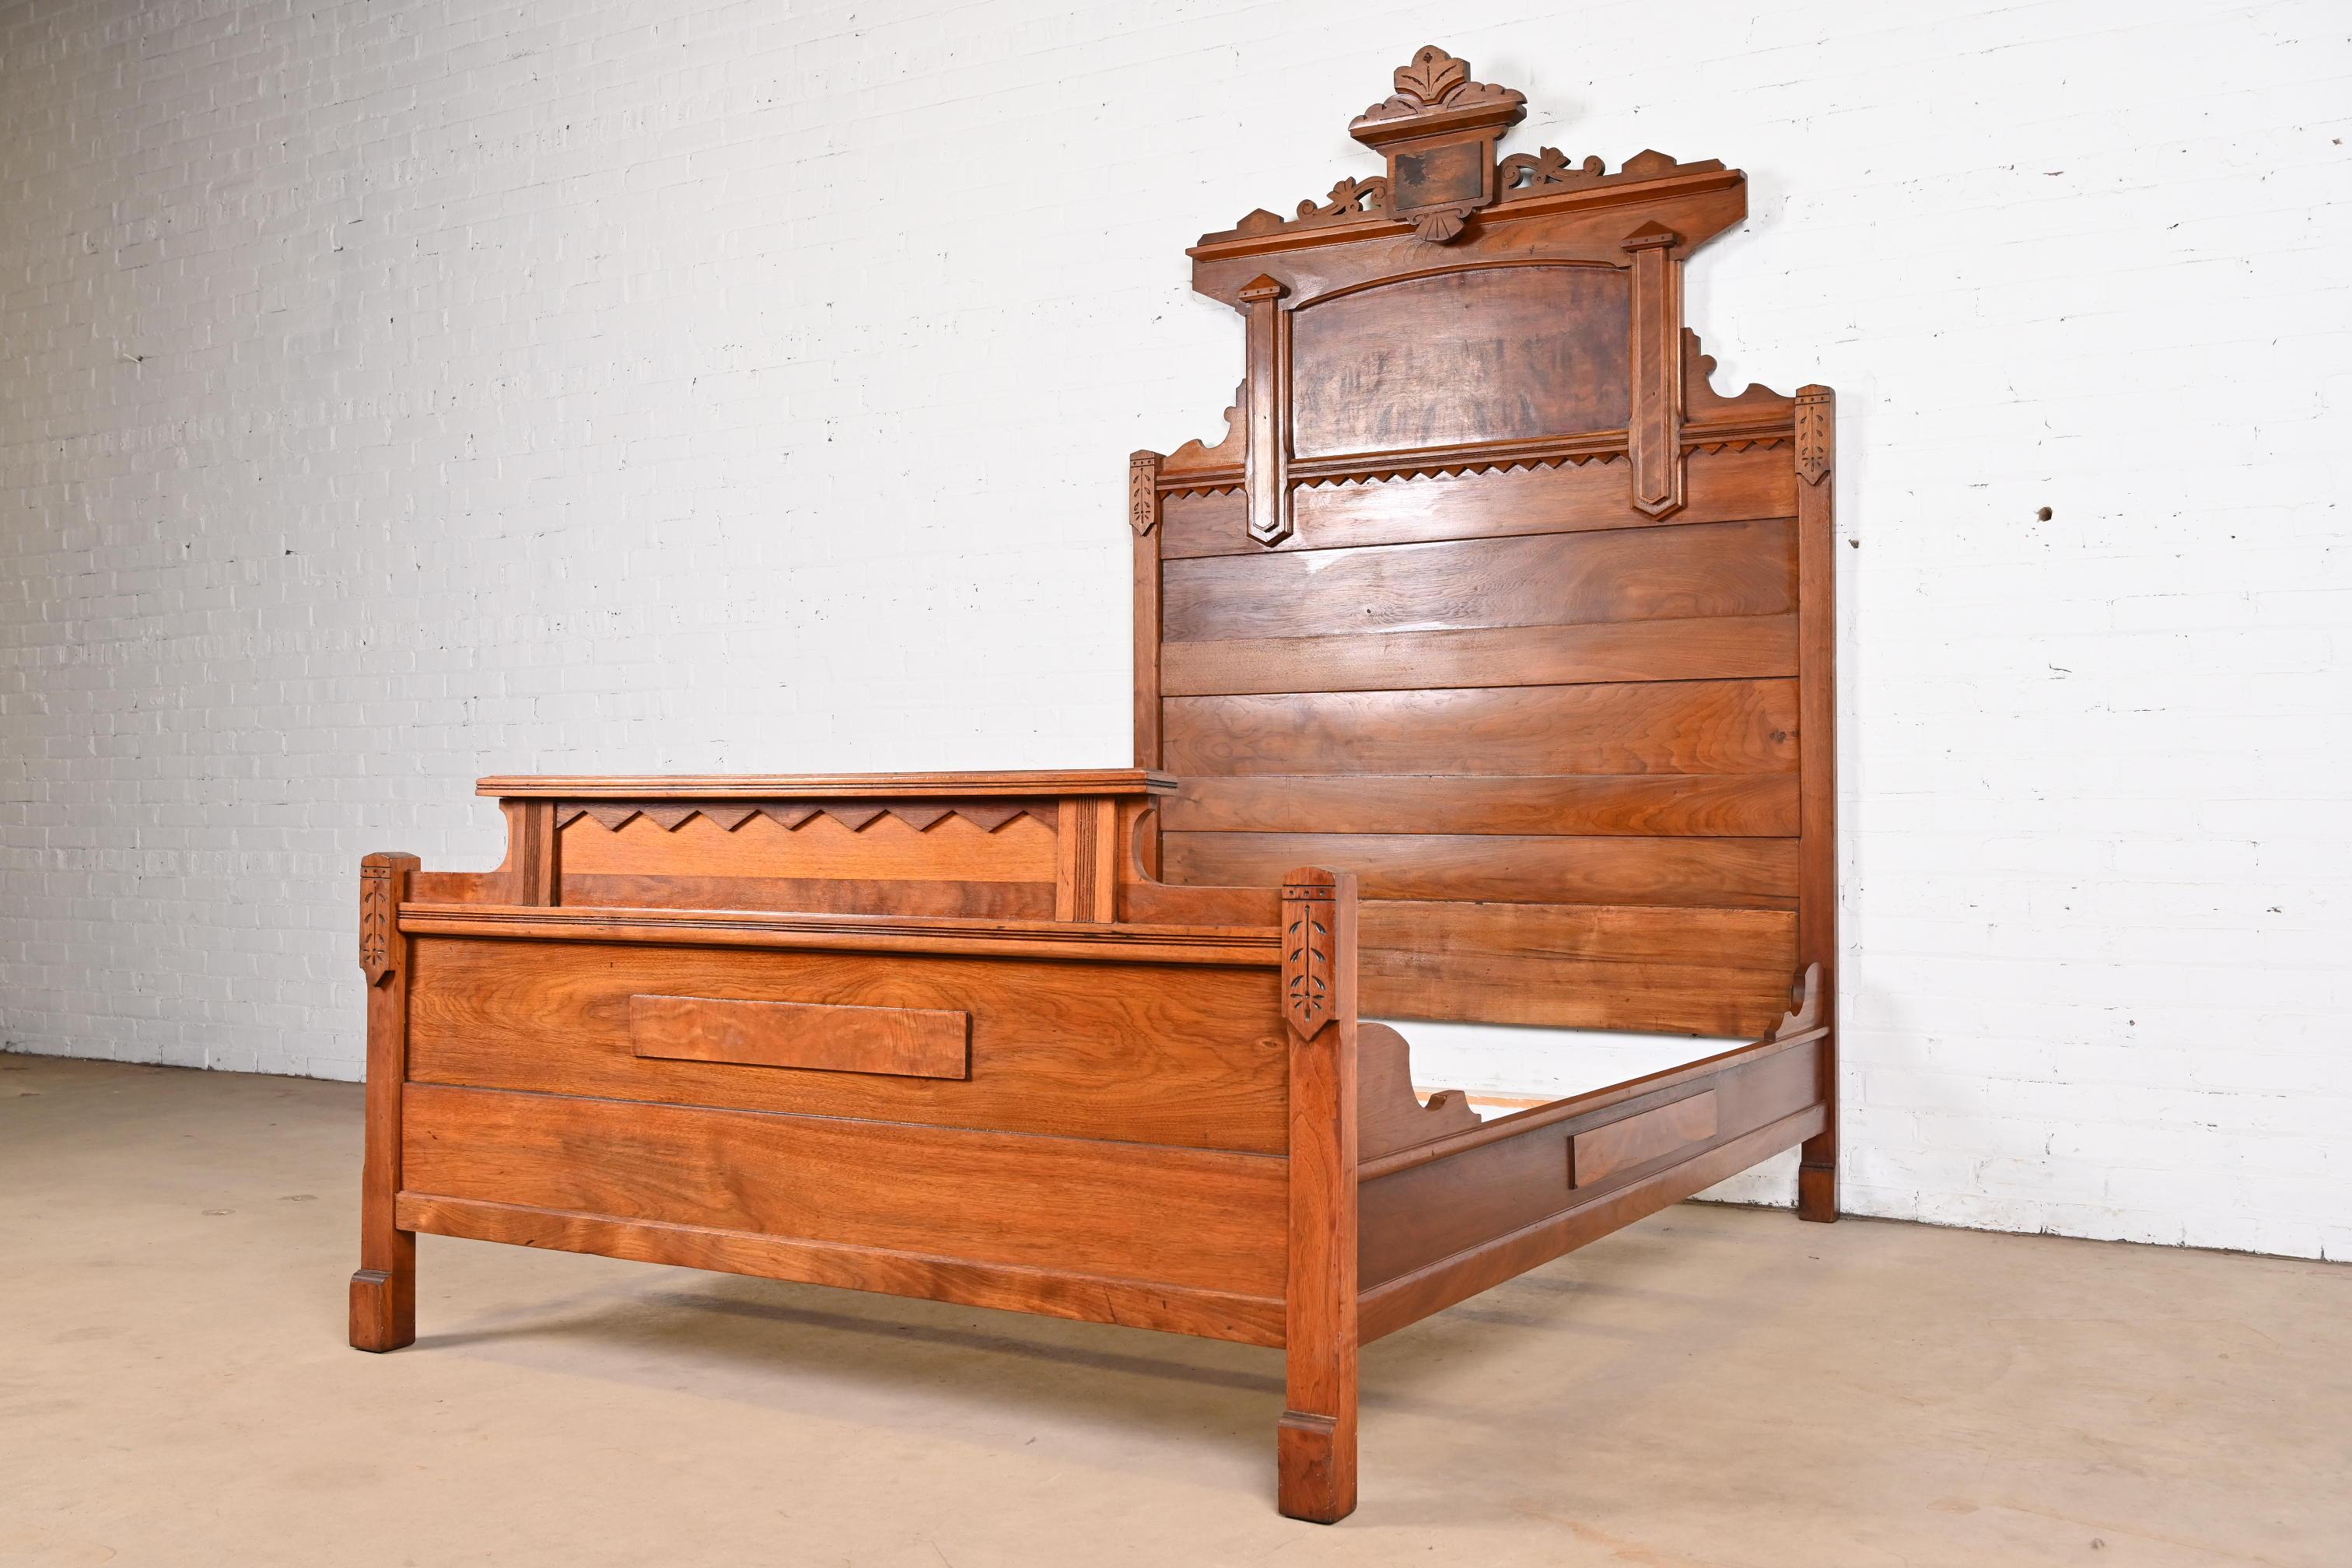 Antique Monumental Eastlake Victorian Carved Burled Walnut Full Size Bed, 1880s In Good Condition For Sale In South Bend, IN